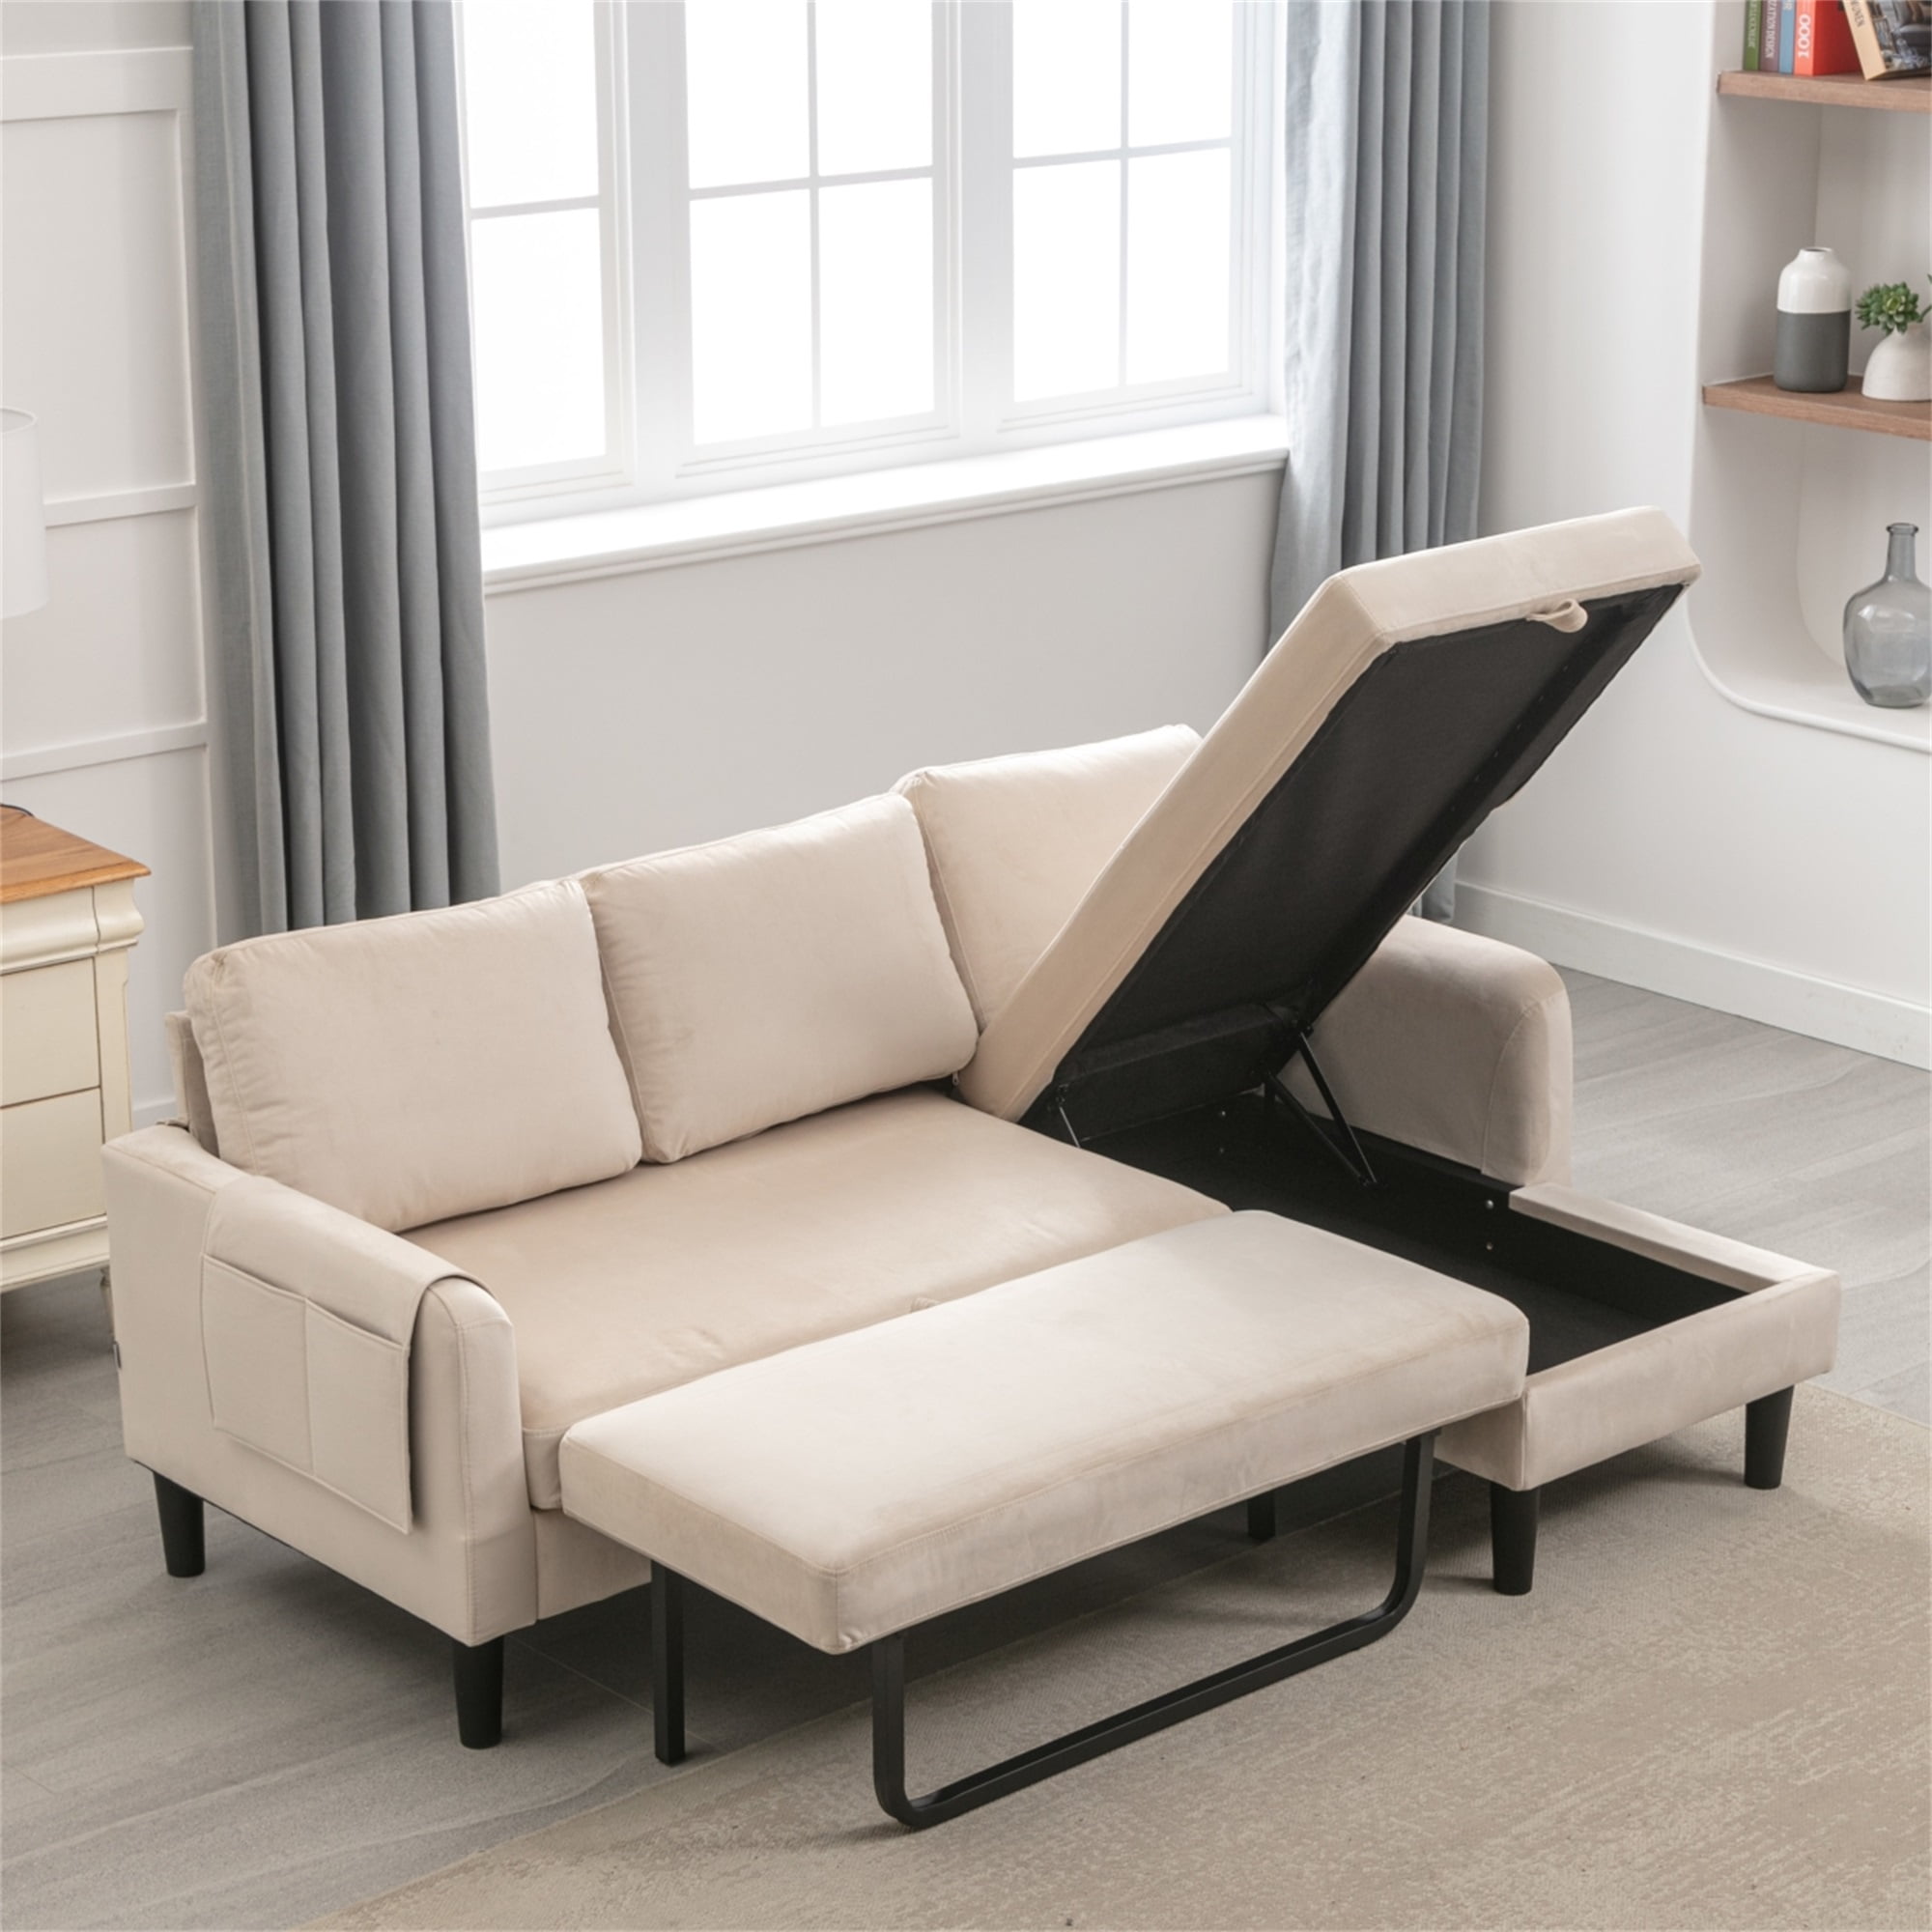 Seat Sleeper Sectional Sofa Couch